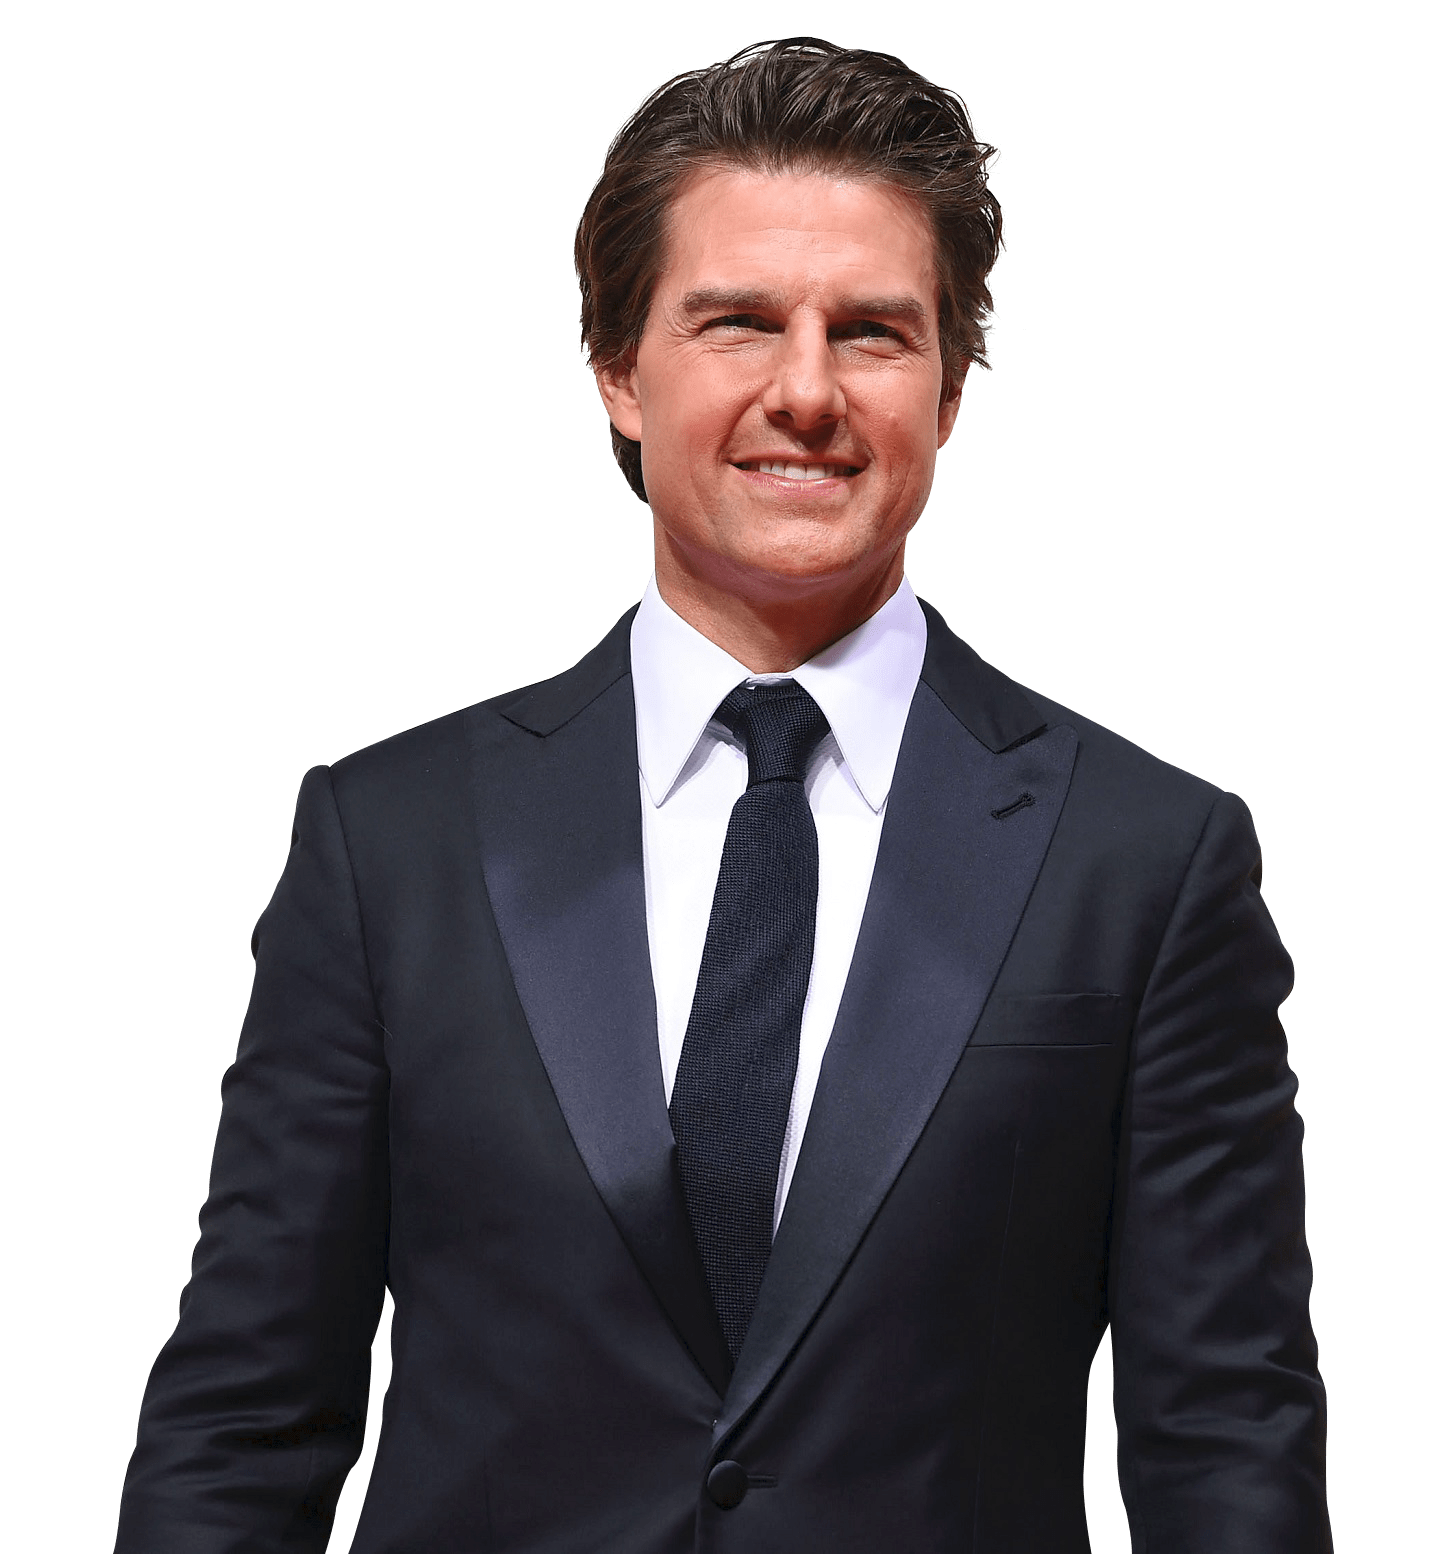 Tom Cruise Suit SVG file